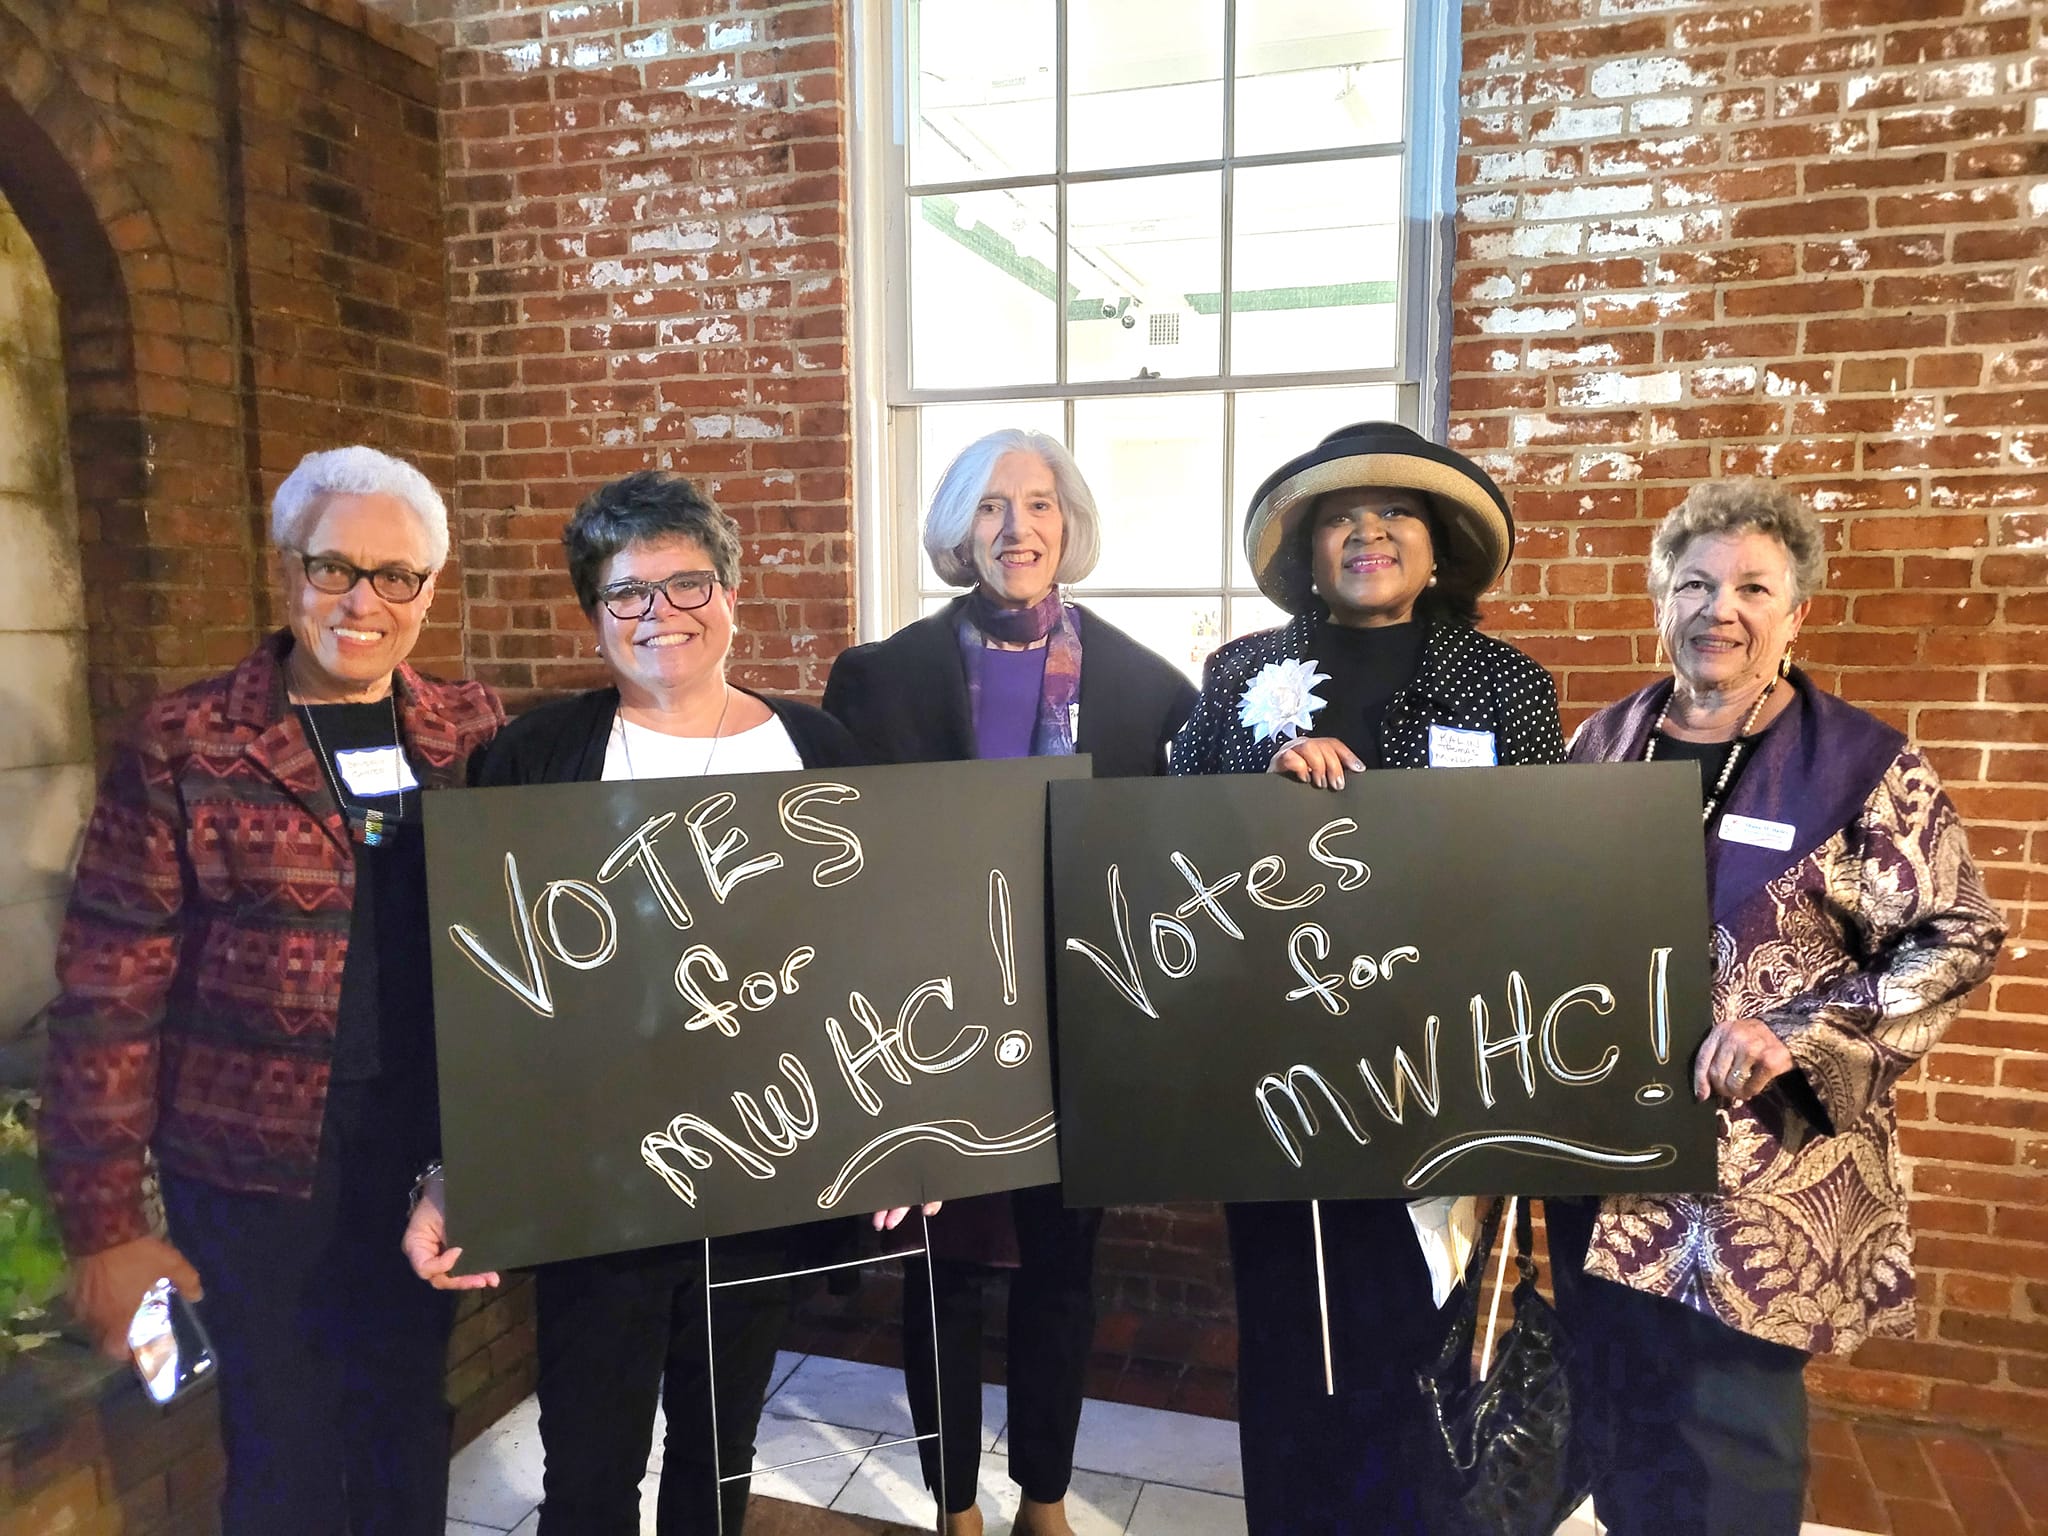 Five MWHC women holding a handmade sign that says "Votes for MWHC"